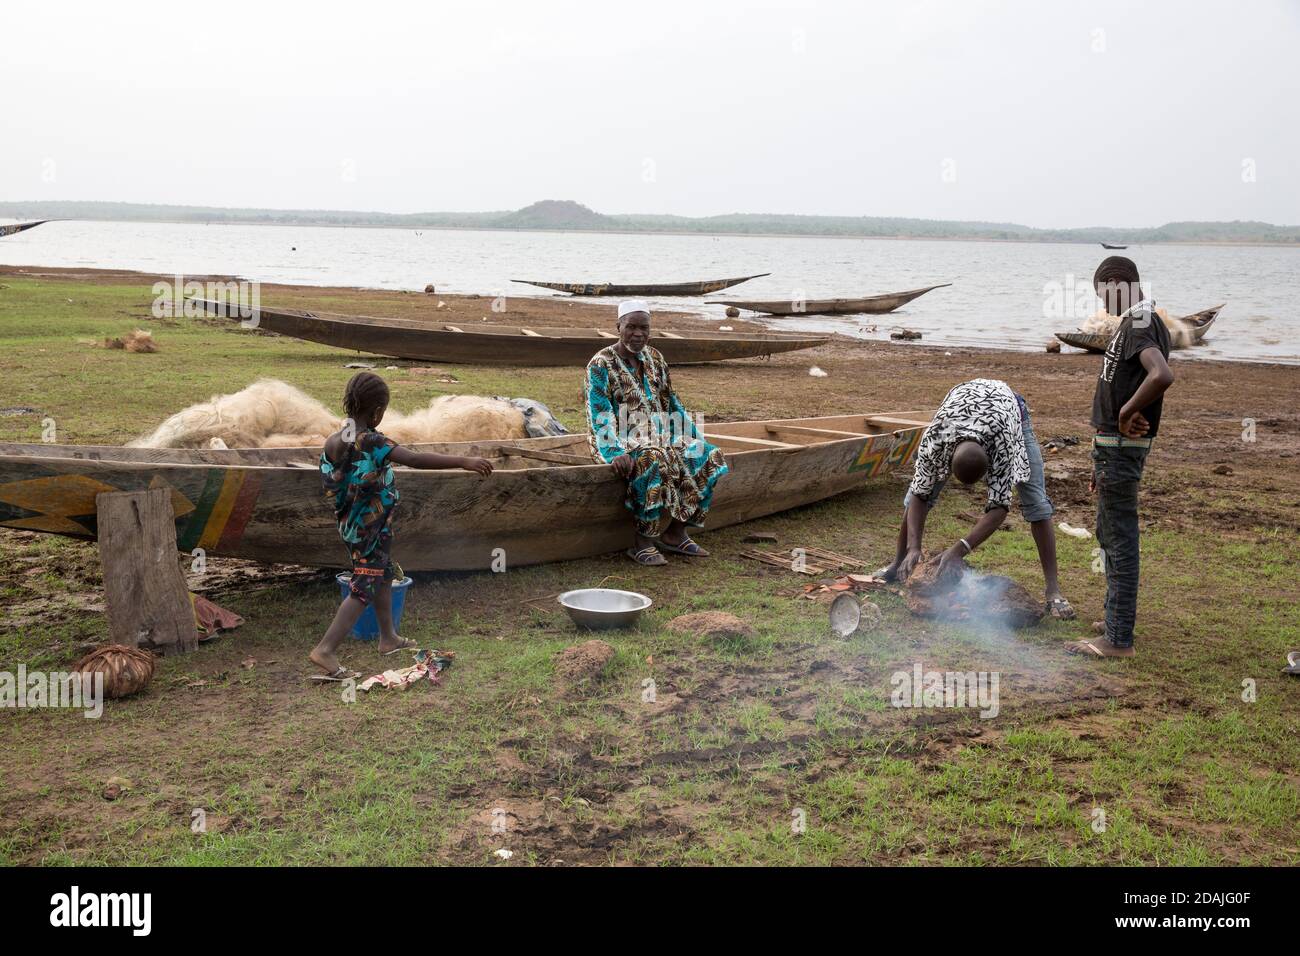 Selingue area, Mali, 27th April 2015; Boubacar Kente, 70, is a fisherman. He wants to restore his old boat by sealing it with natural fat extracted from the nuts of native karité (shea) trees. Boubacar says that before the dam was built the water level was far lower, there were many villages in the river bed and many garden plots. All these were lost when the dam was built and the people relocated. Bozo fishermen from Mopti and Segou now arrive every dry season because of the abundance of fish in the new dam lake, and some like him stay the year round. Stock Photo